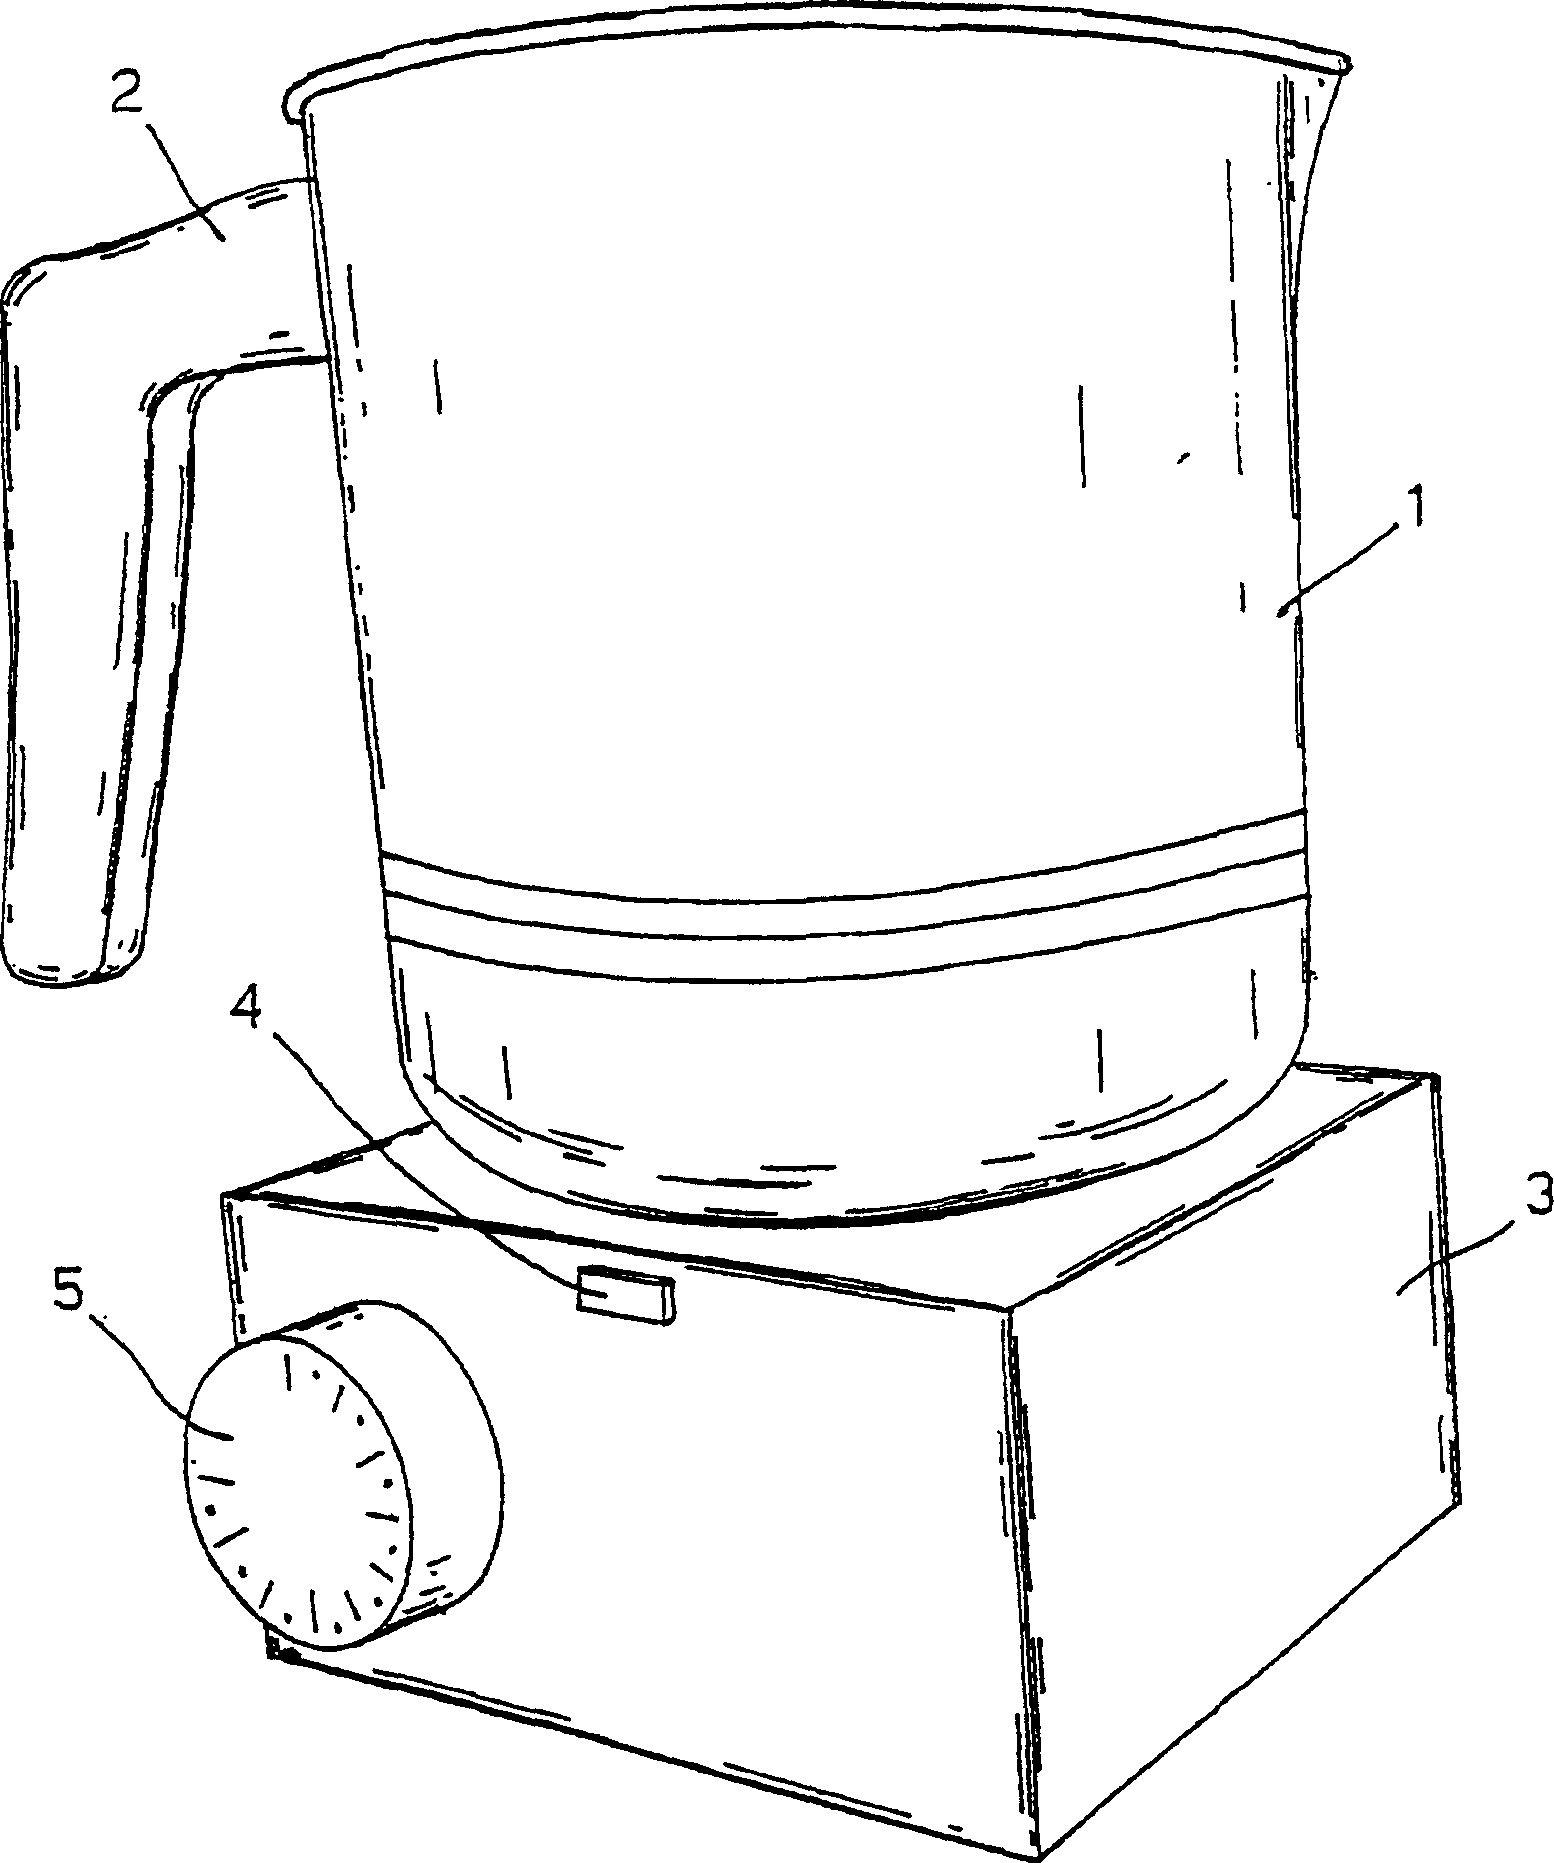 Automatic device for heating and frothing a liquid, in particular milk